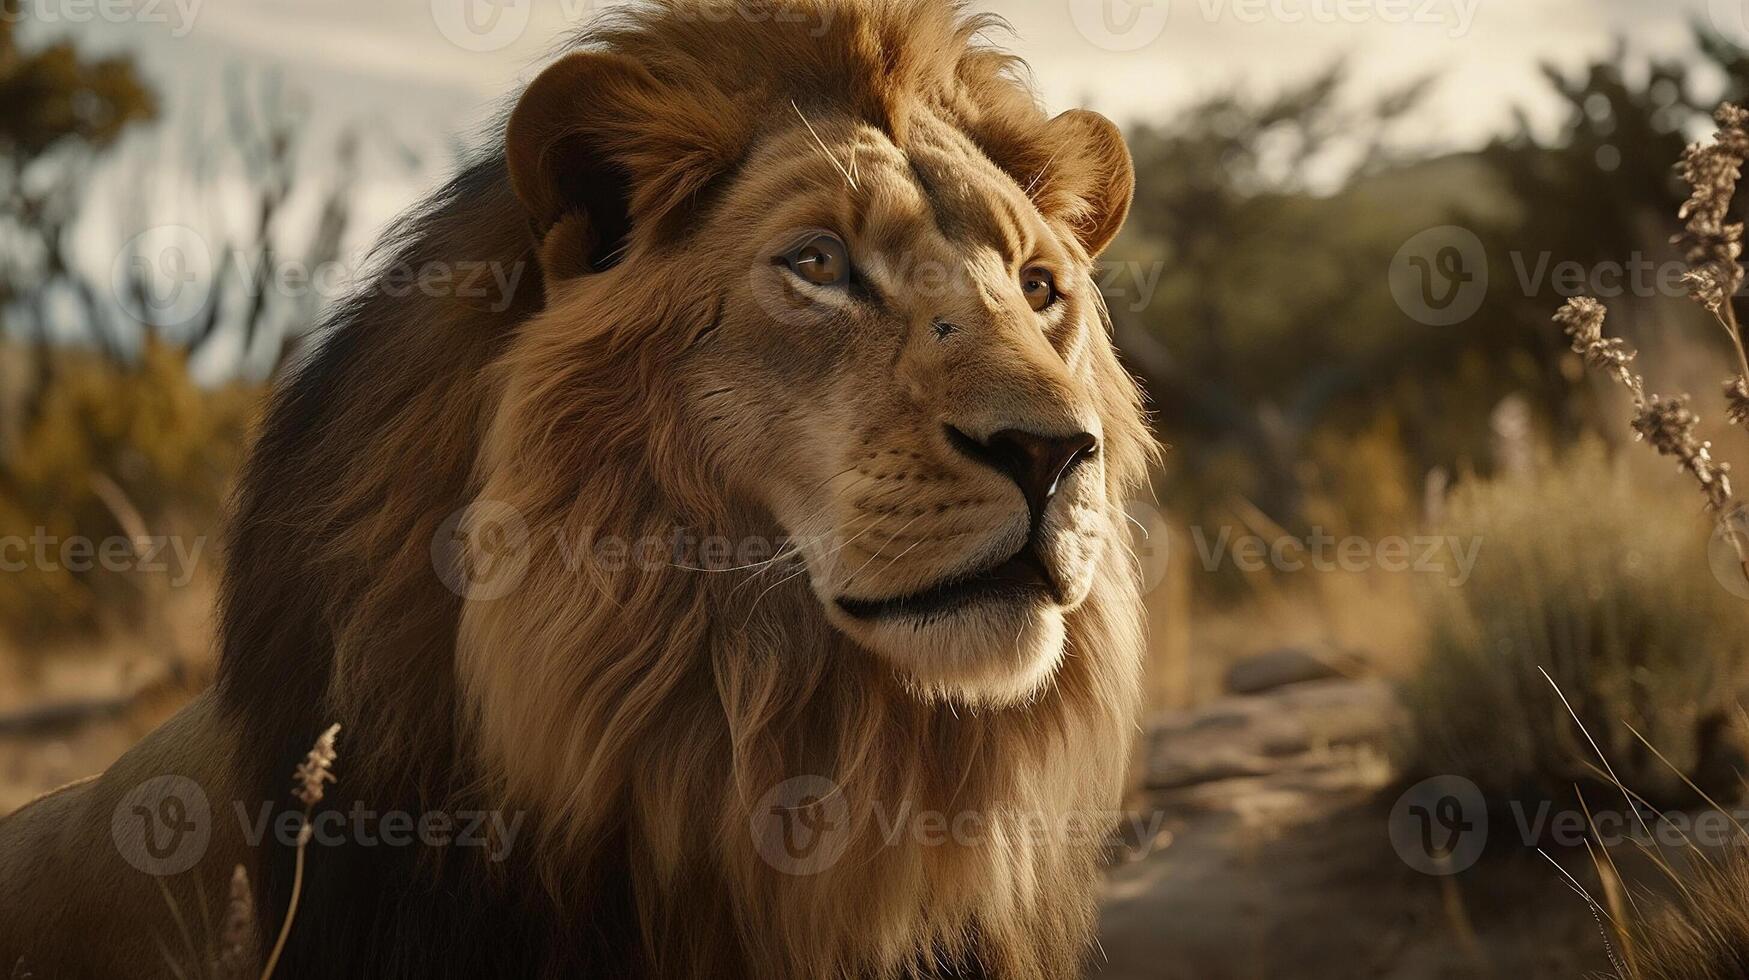 Close up of a lion in its natural habitat background. Animal kingdom concept photo